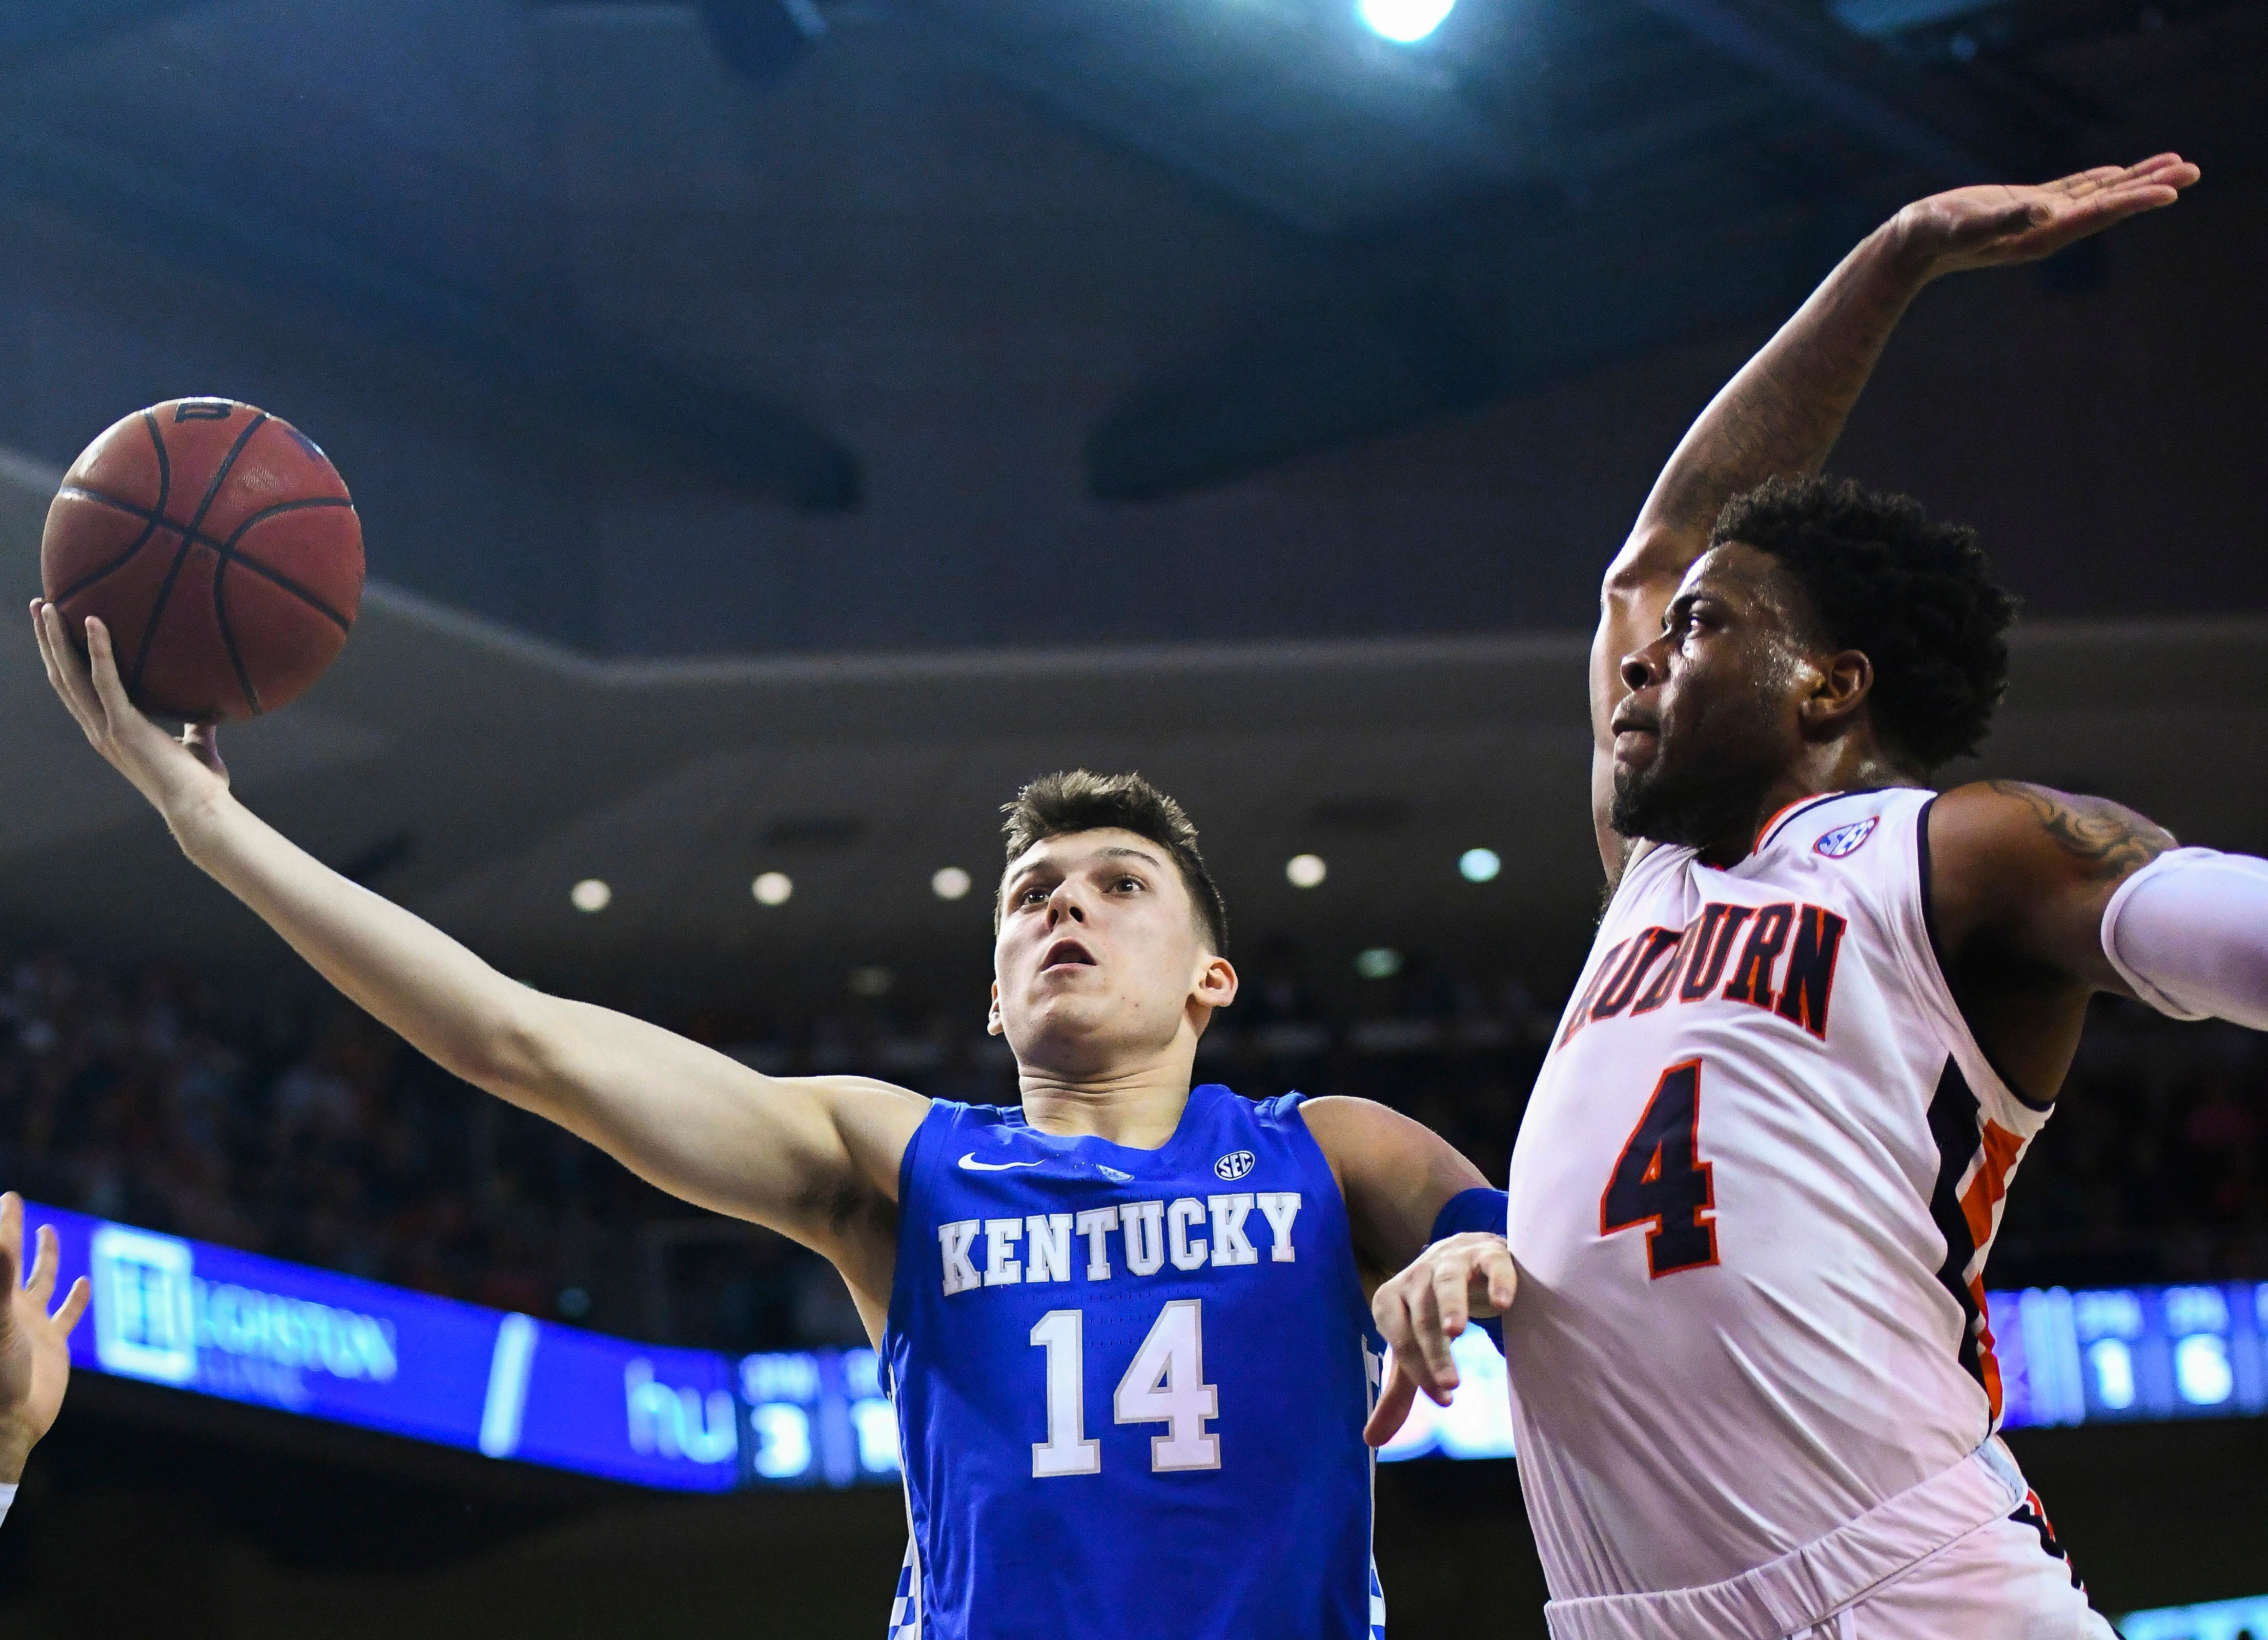 22. Boston Celtics: Tyler Herro, guard, Kentucky. Some mock drafts have Herro going as high as the lottery and others have him falling to the 20s. The Celtics could take their chances with their three draft picks, if he’s still around at this point. He’s a good shooter and with his potential, he could pay off.